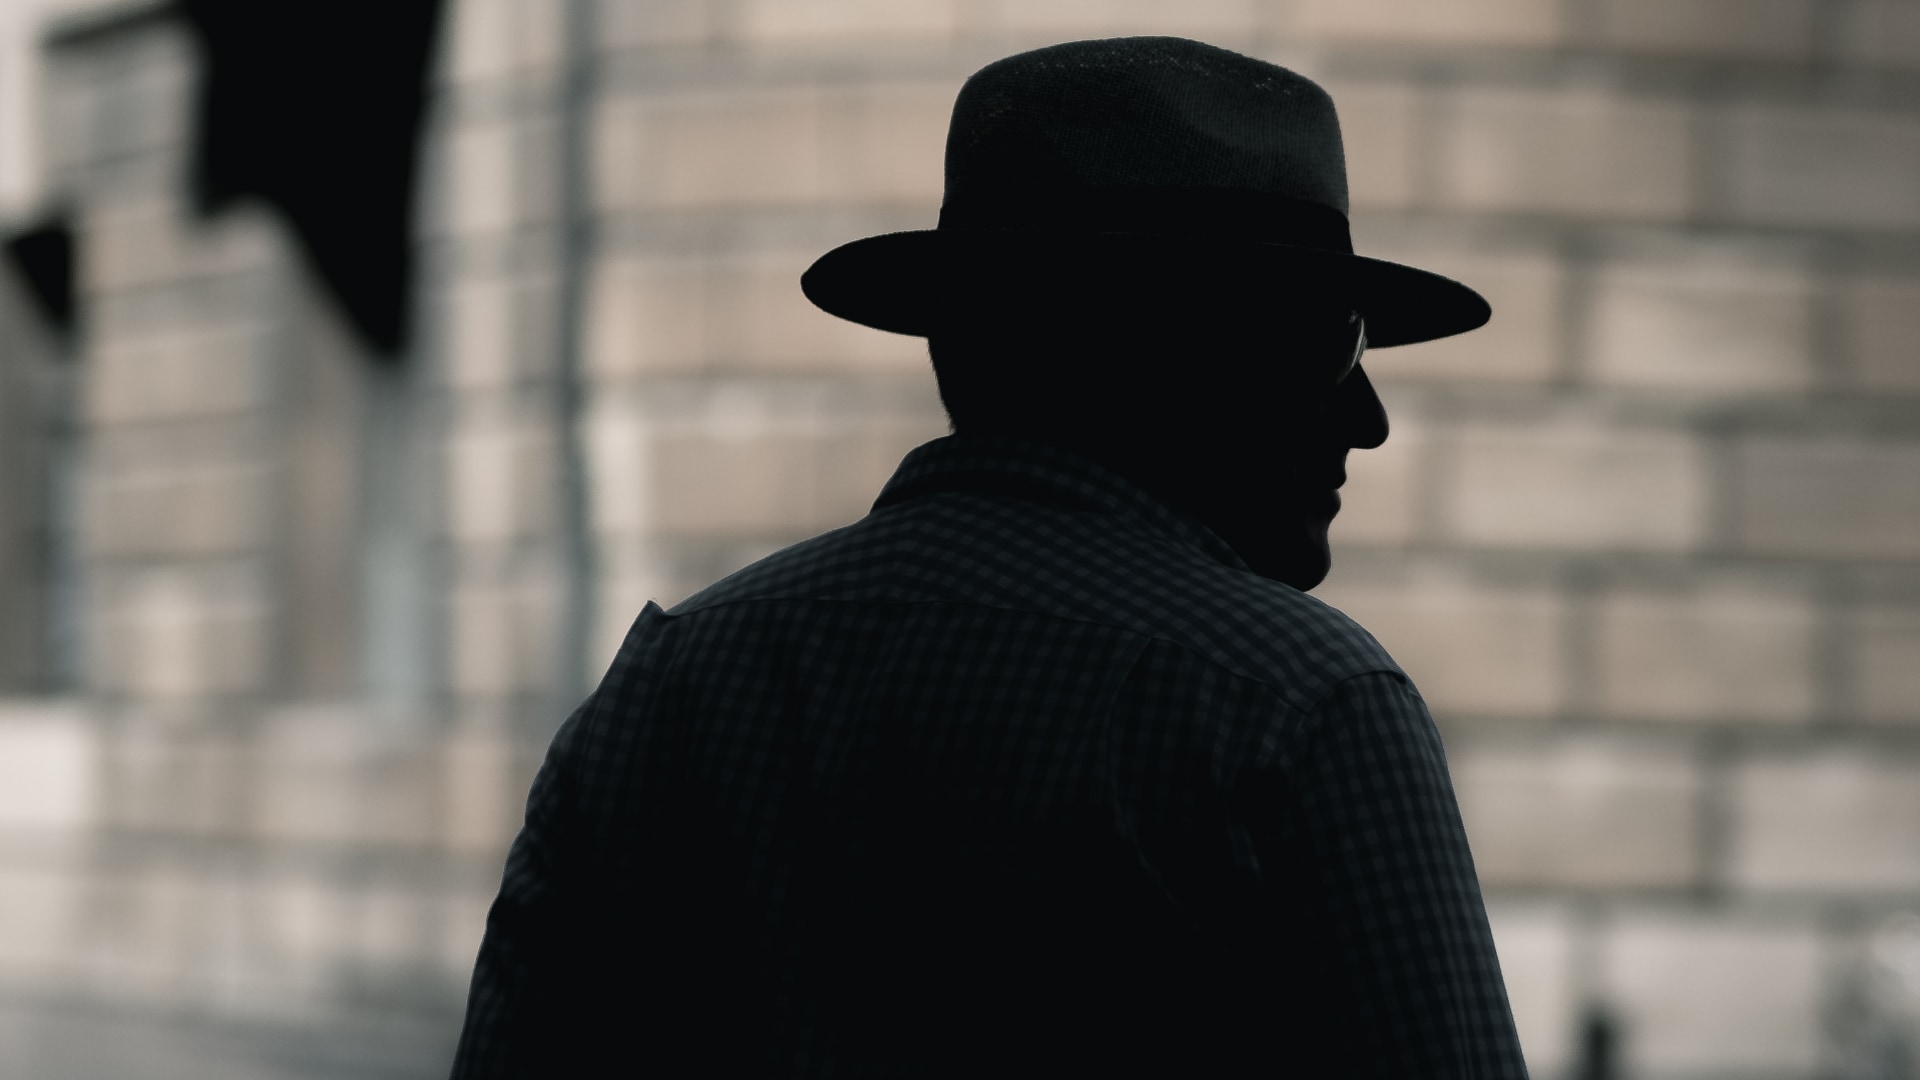 Silhouette of a detective standing on the street, set against a blurred focus background